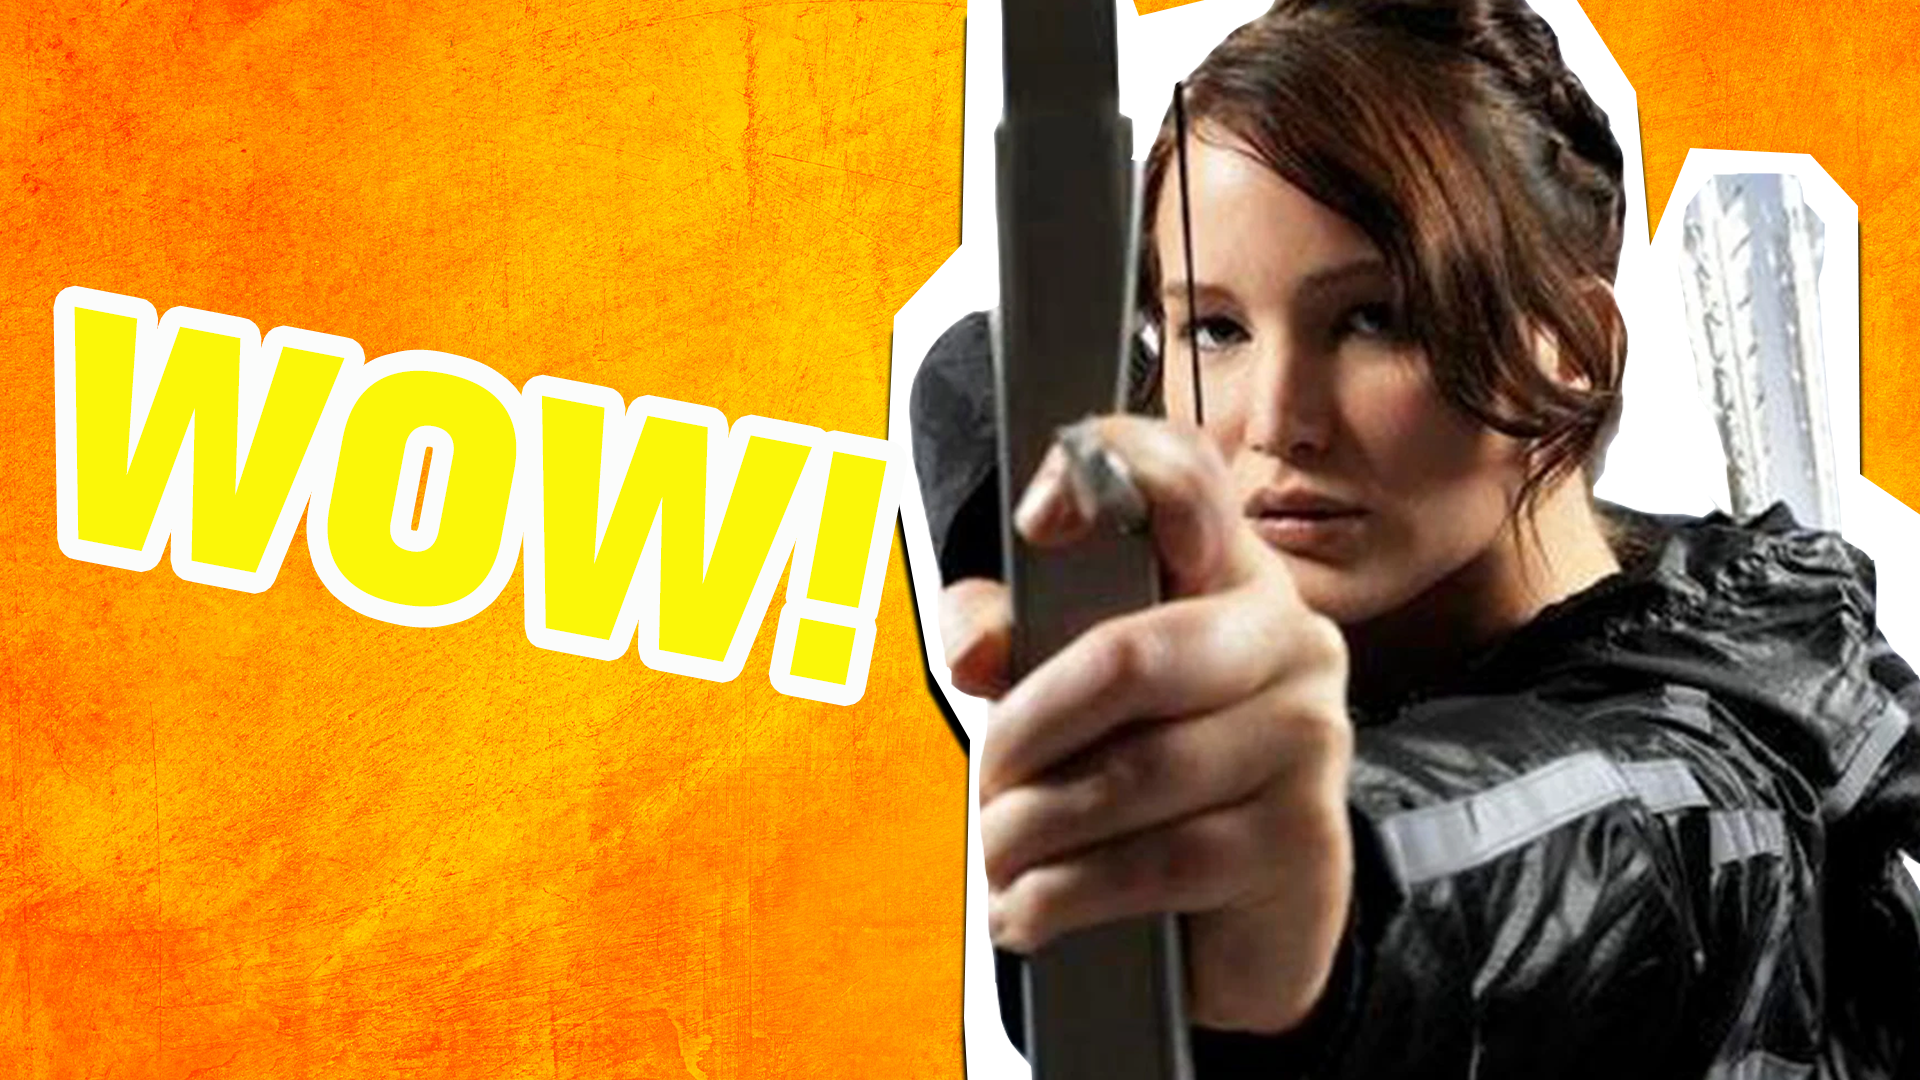 Incredible! You survived the Hunger Games AND this quiz, because you got 100% correct answers! Congrats!